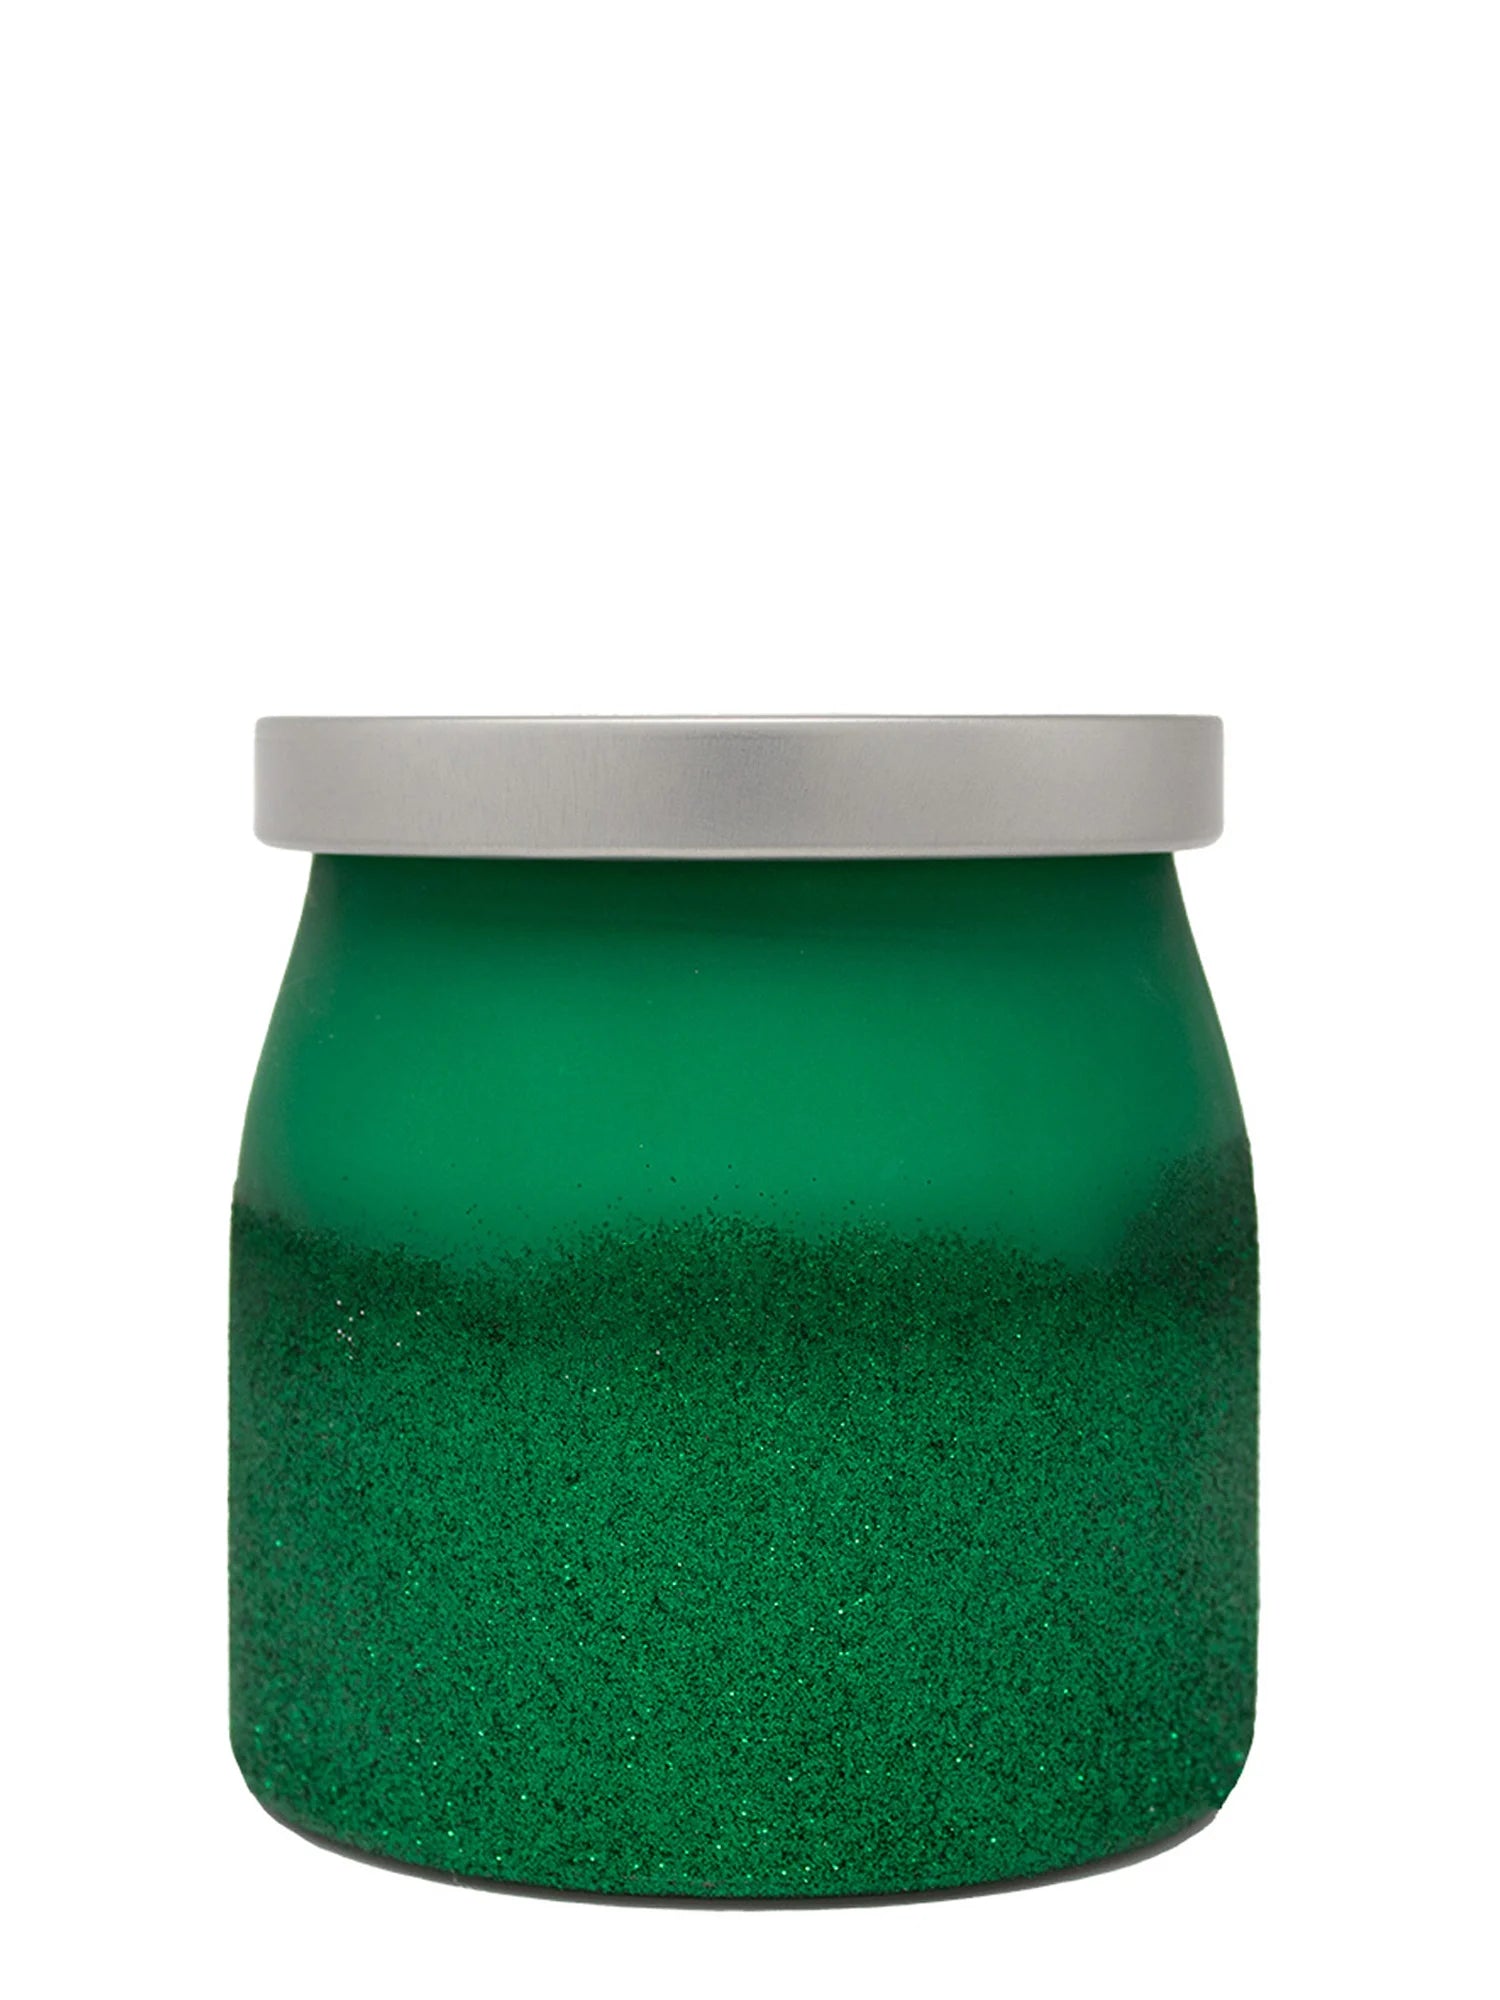 Frosted Evergreen 16oz Limited Edition Candle by Milkhouse Candle Co.